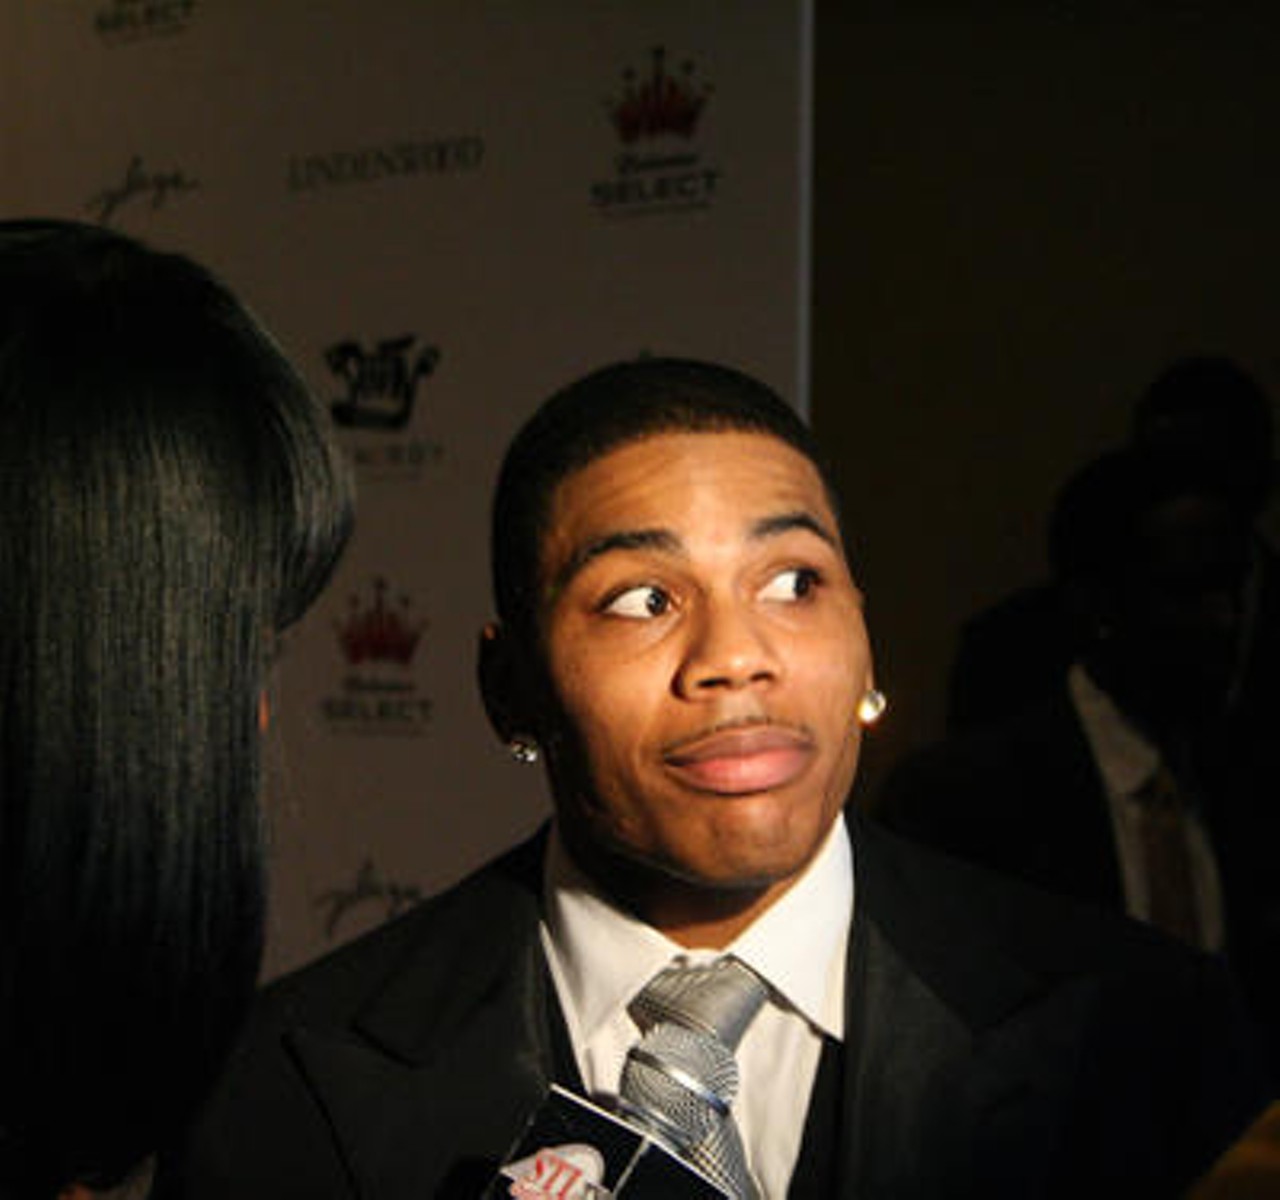 Nelly at his own Black and White Ball on November 30. More photos.